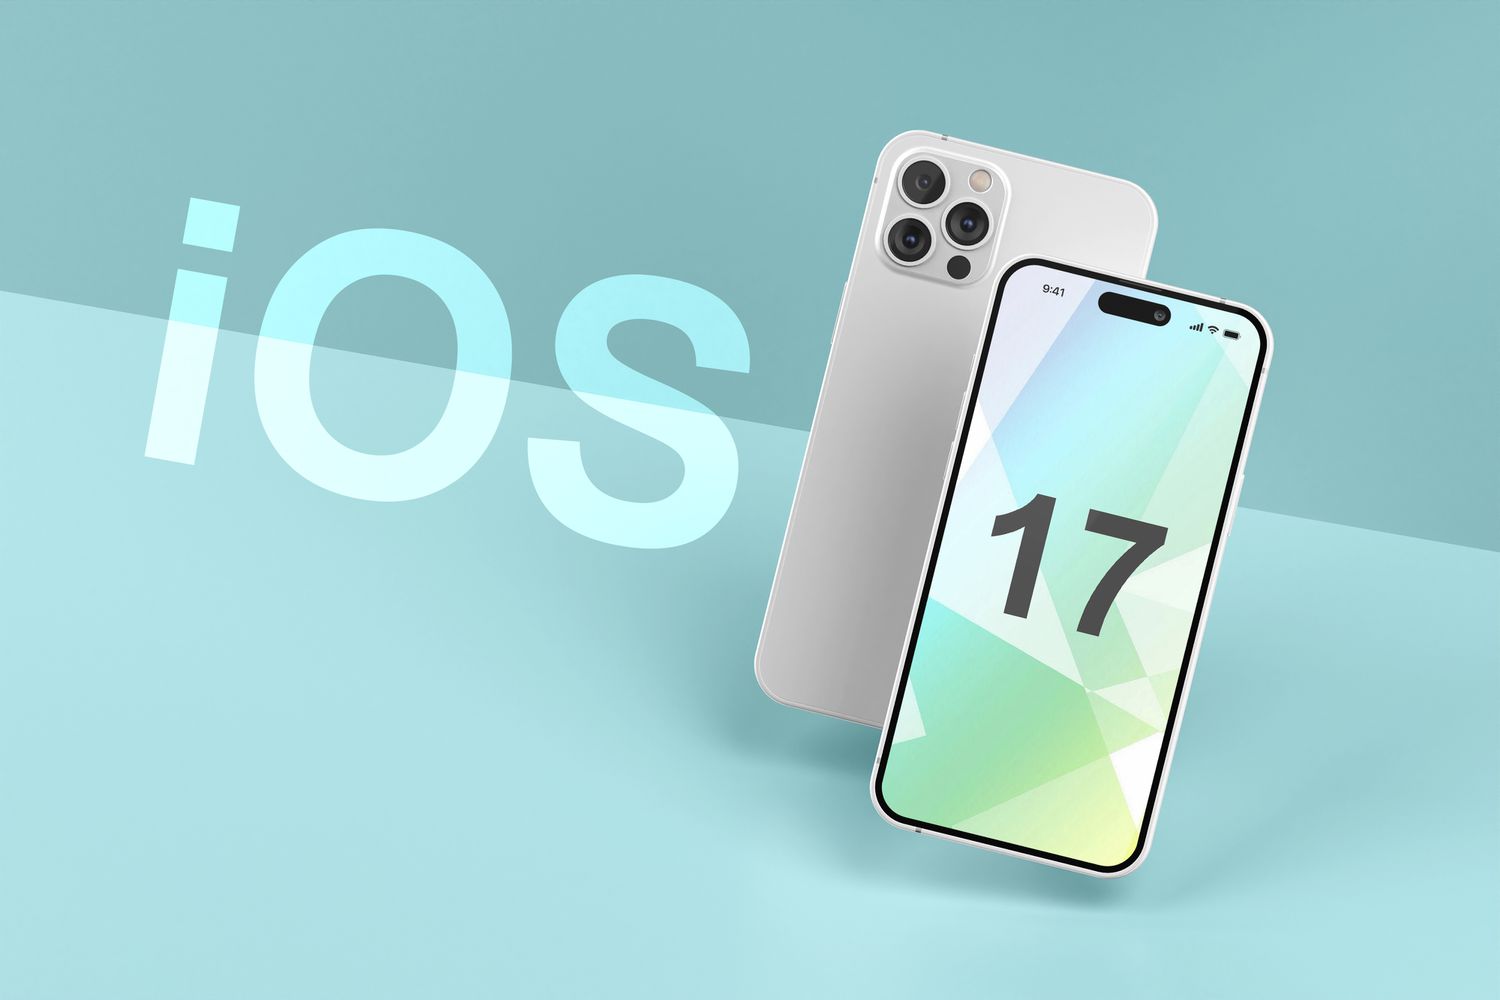 Apple may not bring major changes with iOS 17 .